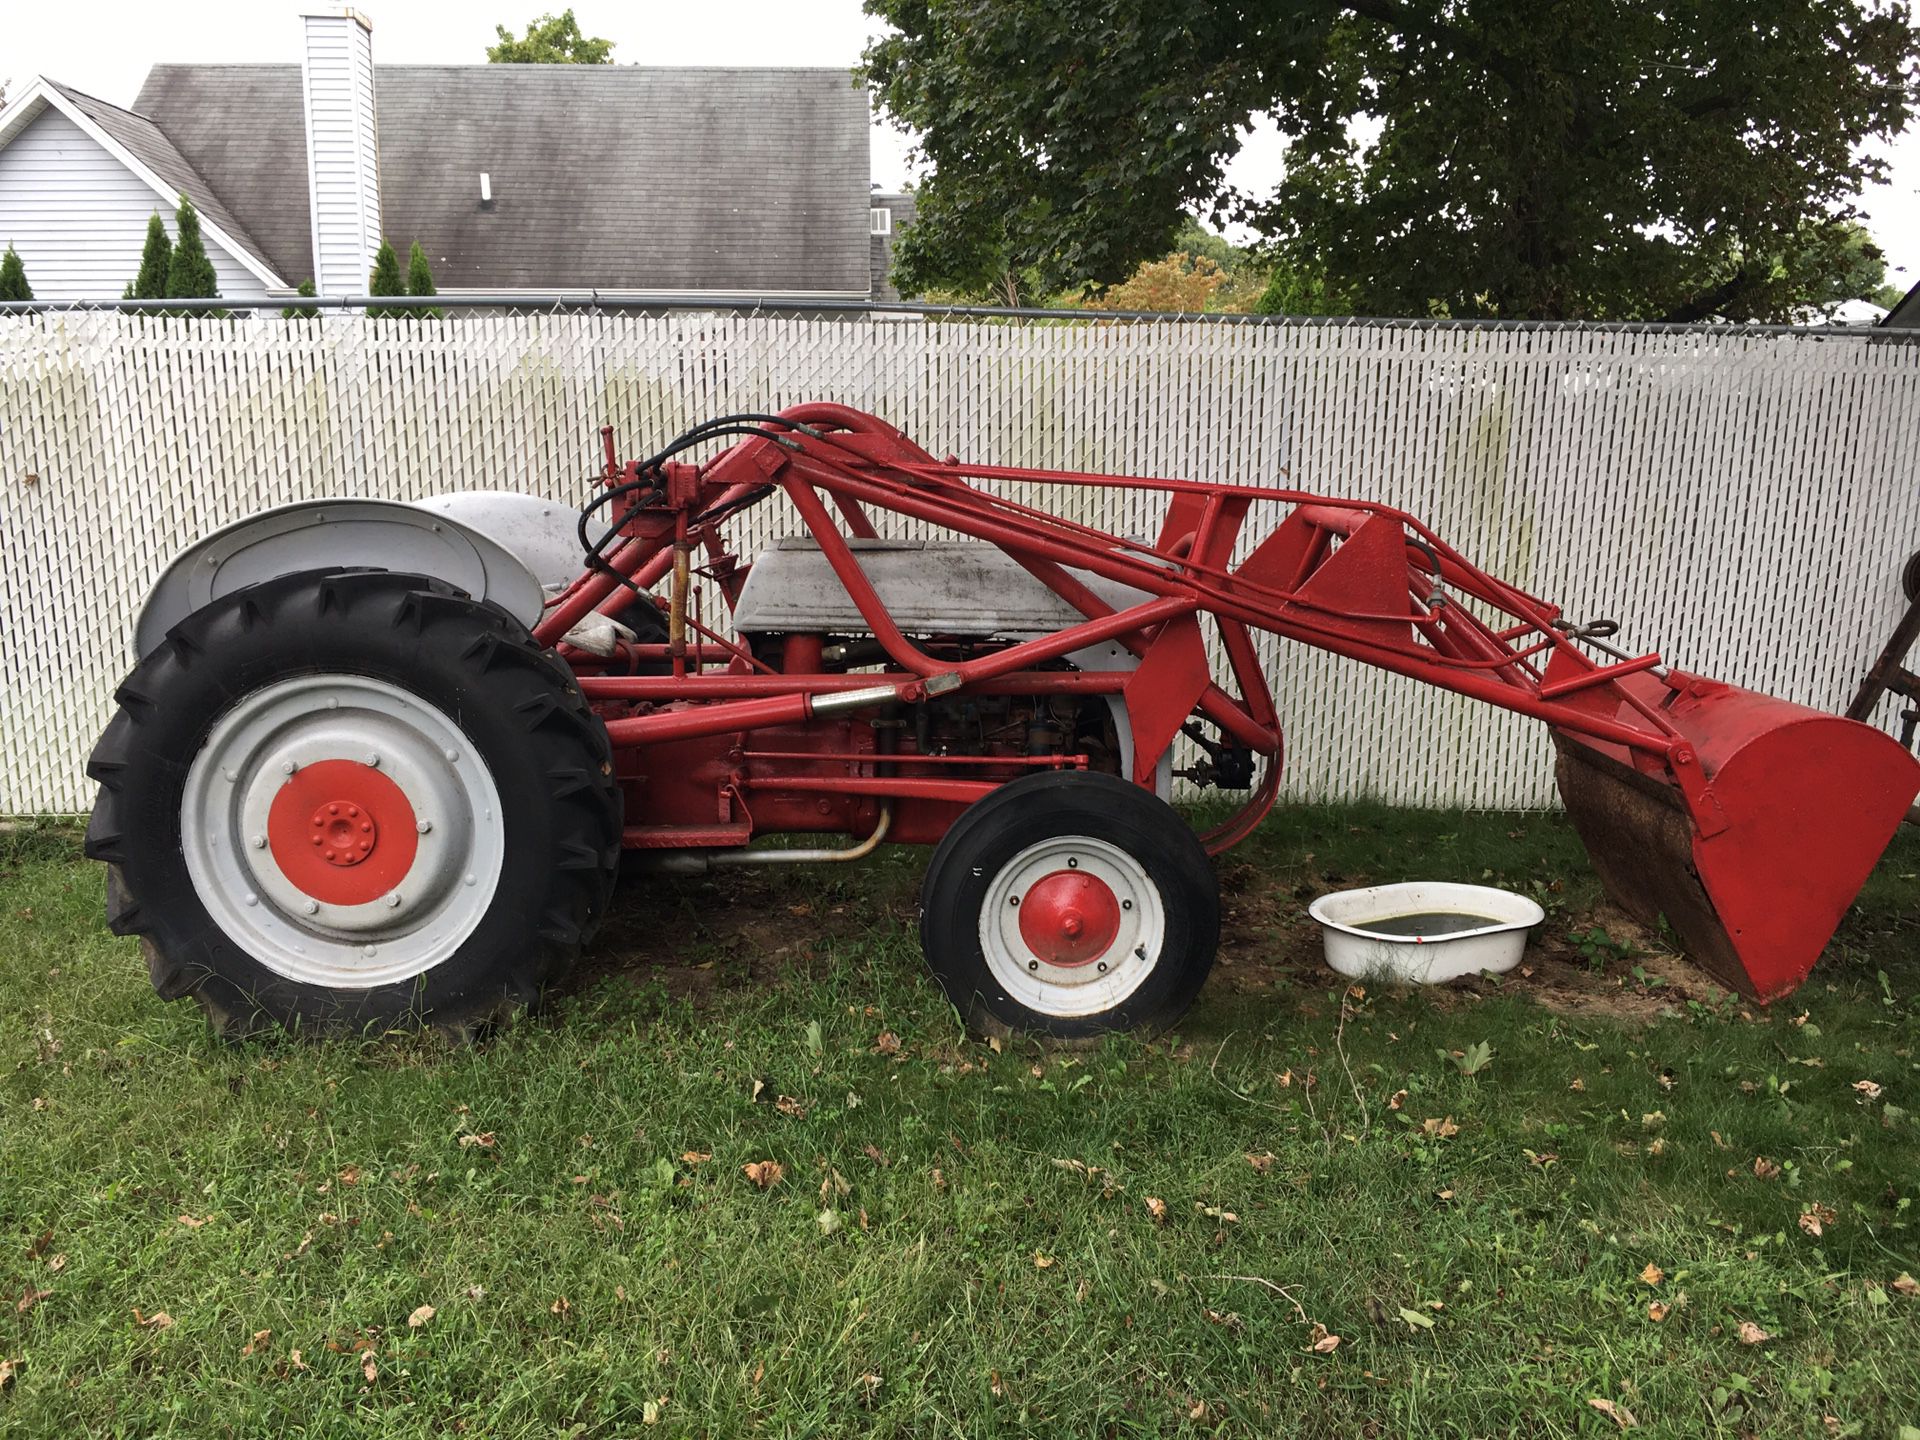 Old tractor for sale. Runs great. Front loader